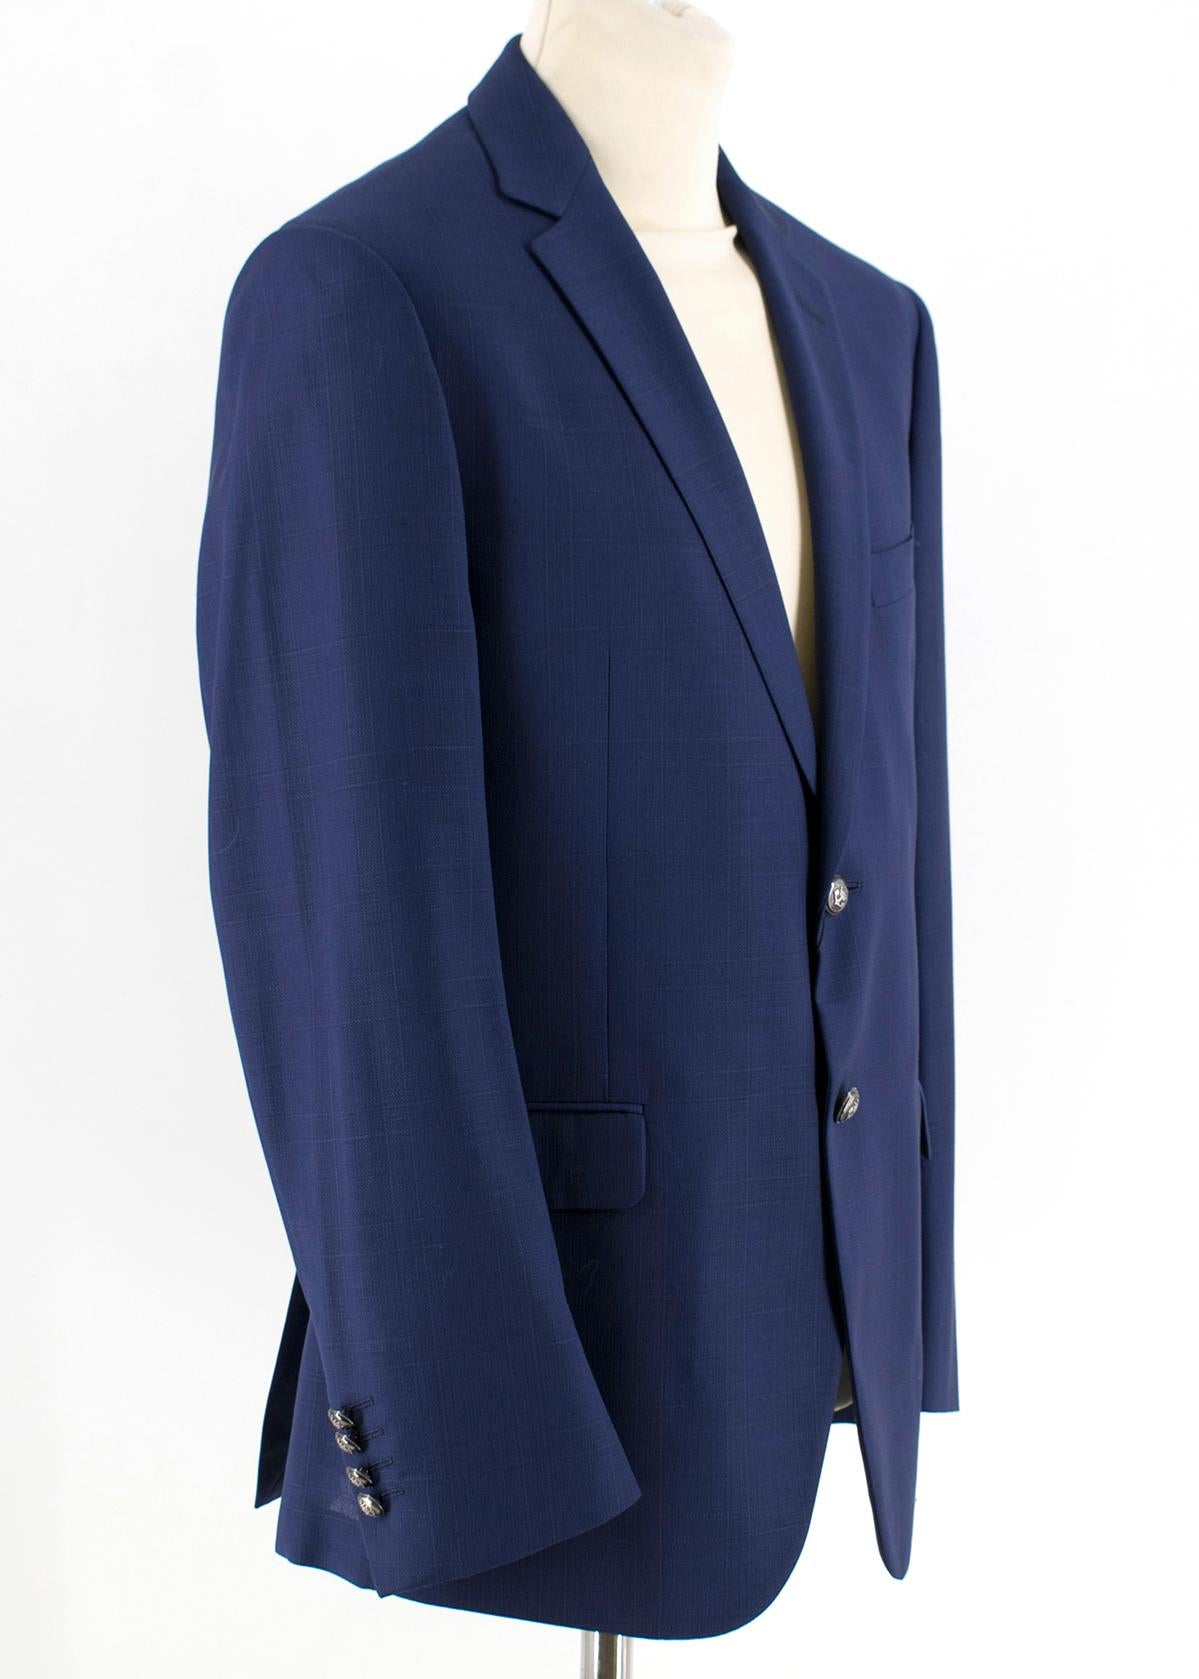 Balmain Blue Single Breasted Slim Fit Wool Blazer

Blue single breasted jacket, 
Two front flap pockets, 
Left chest pocket,
Silver-grey tone buttons in front with crown detailing,
Standard notch lapel collar, 
Buttons along cuffs, 
Two interior